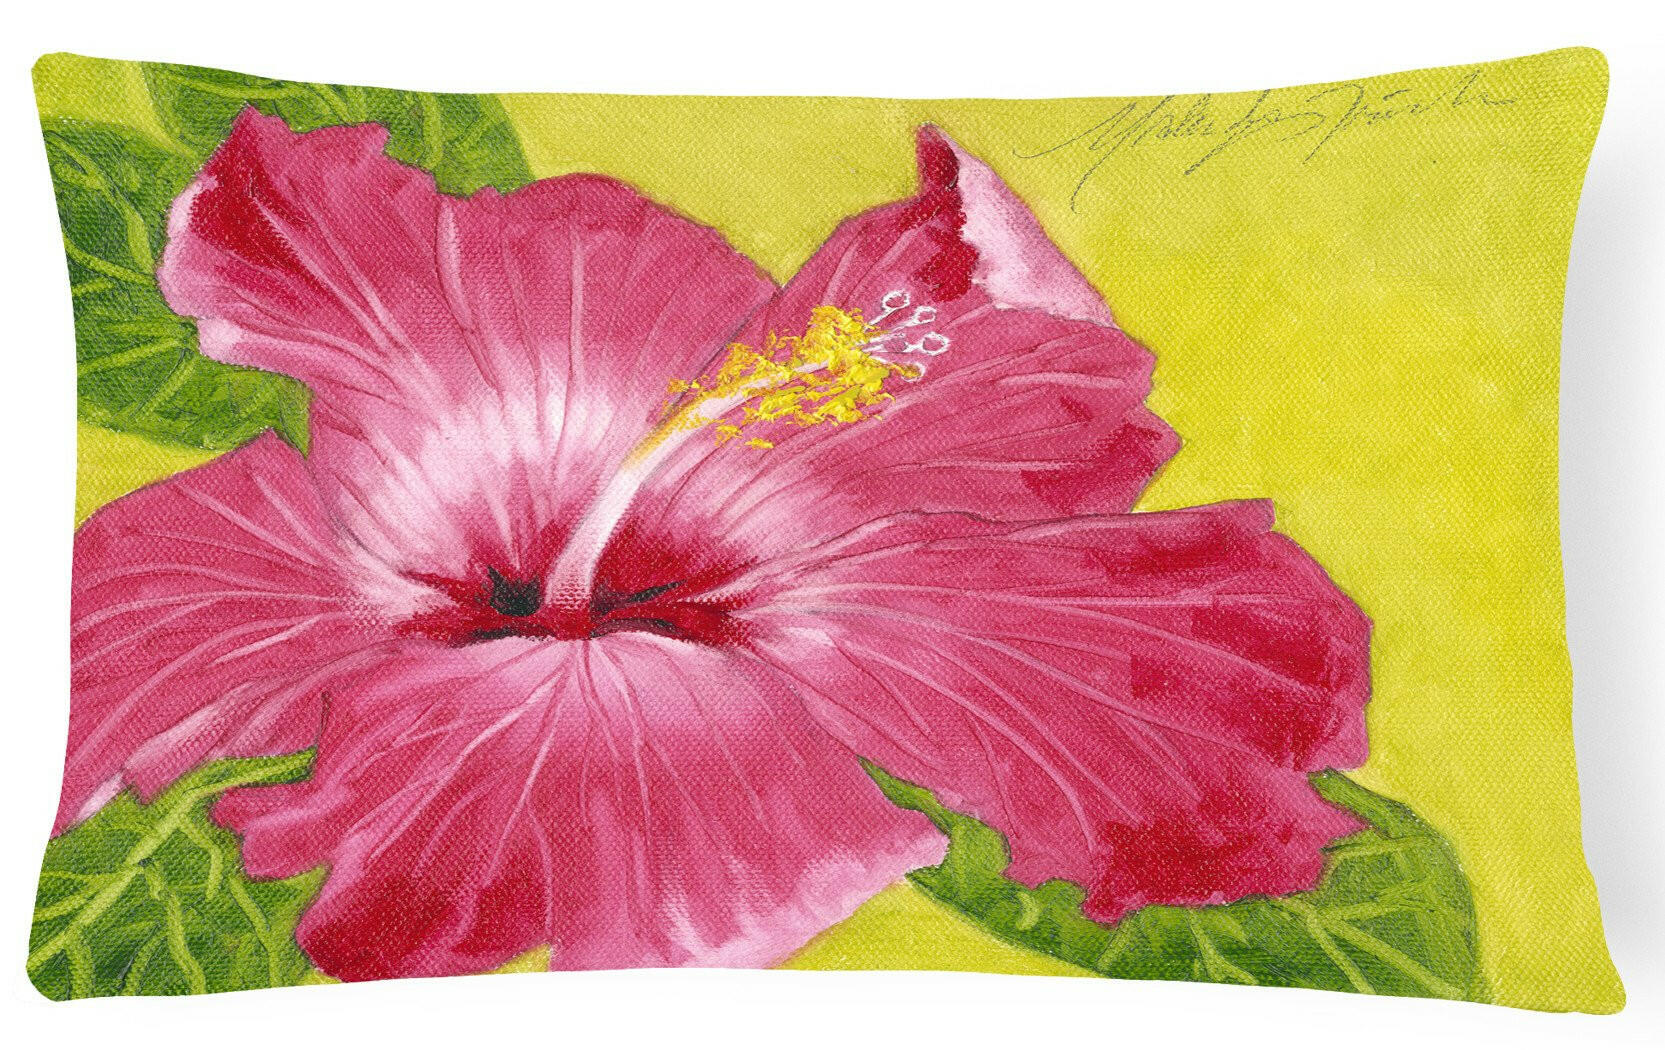 Hot Pink Hibiscus by Malenda Trick Fabric Decorative Pillow TMTR0317PW1216 by Caroline's Treasures